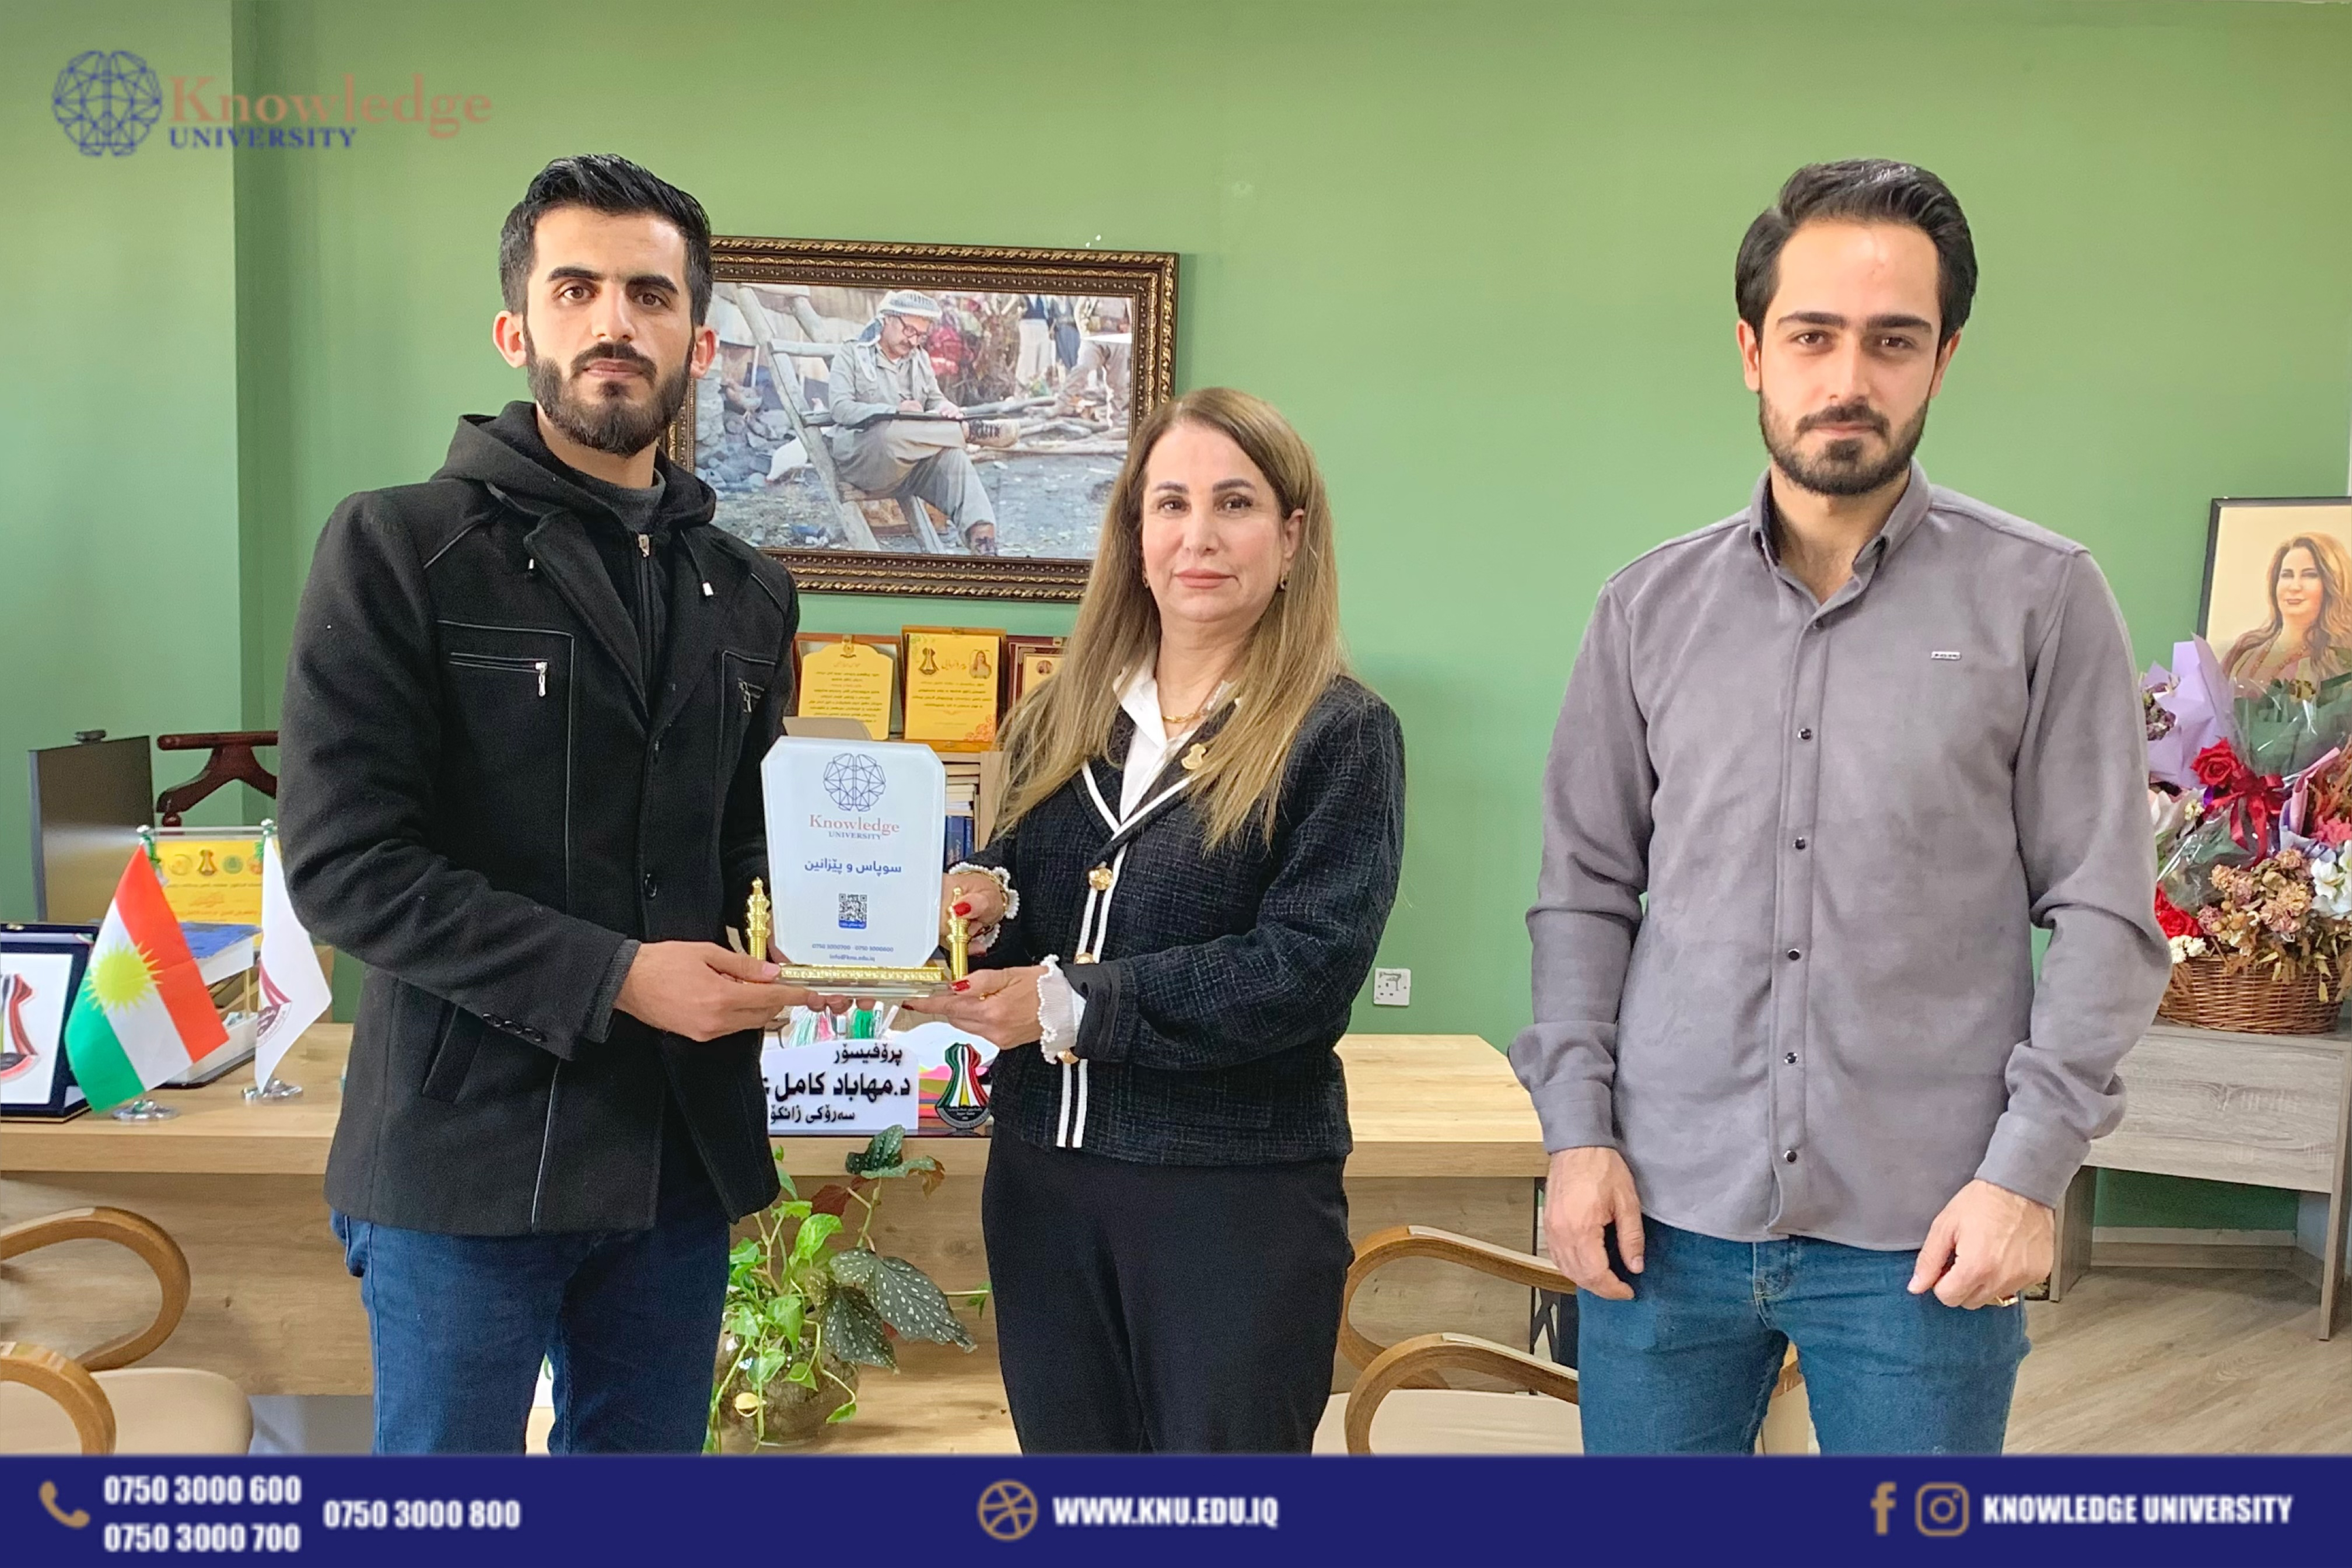 Knowledge University Delegation Strengthens Ties with Halabja University through Collaborative Initiatives